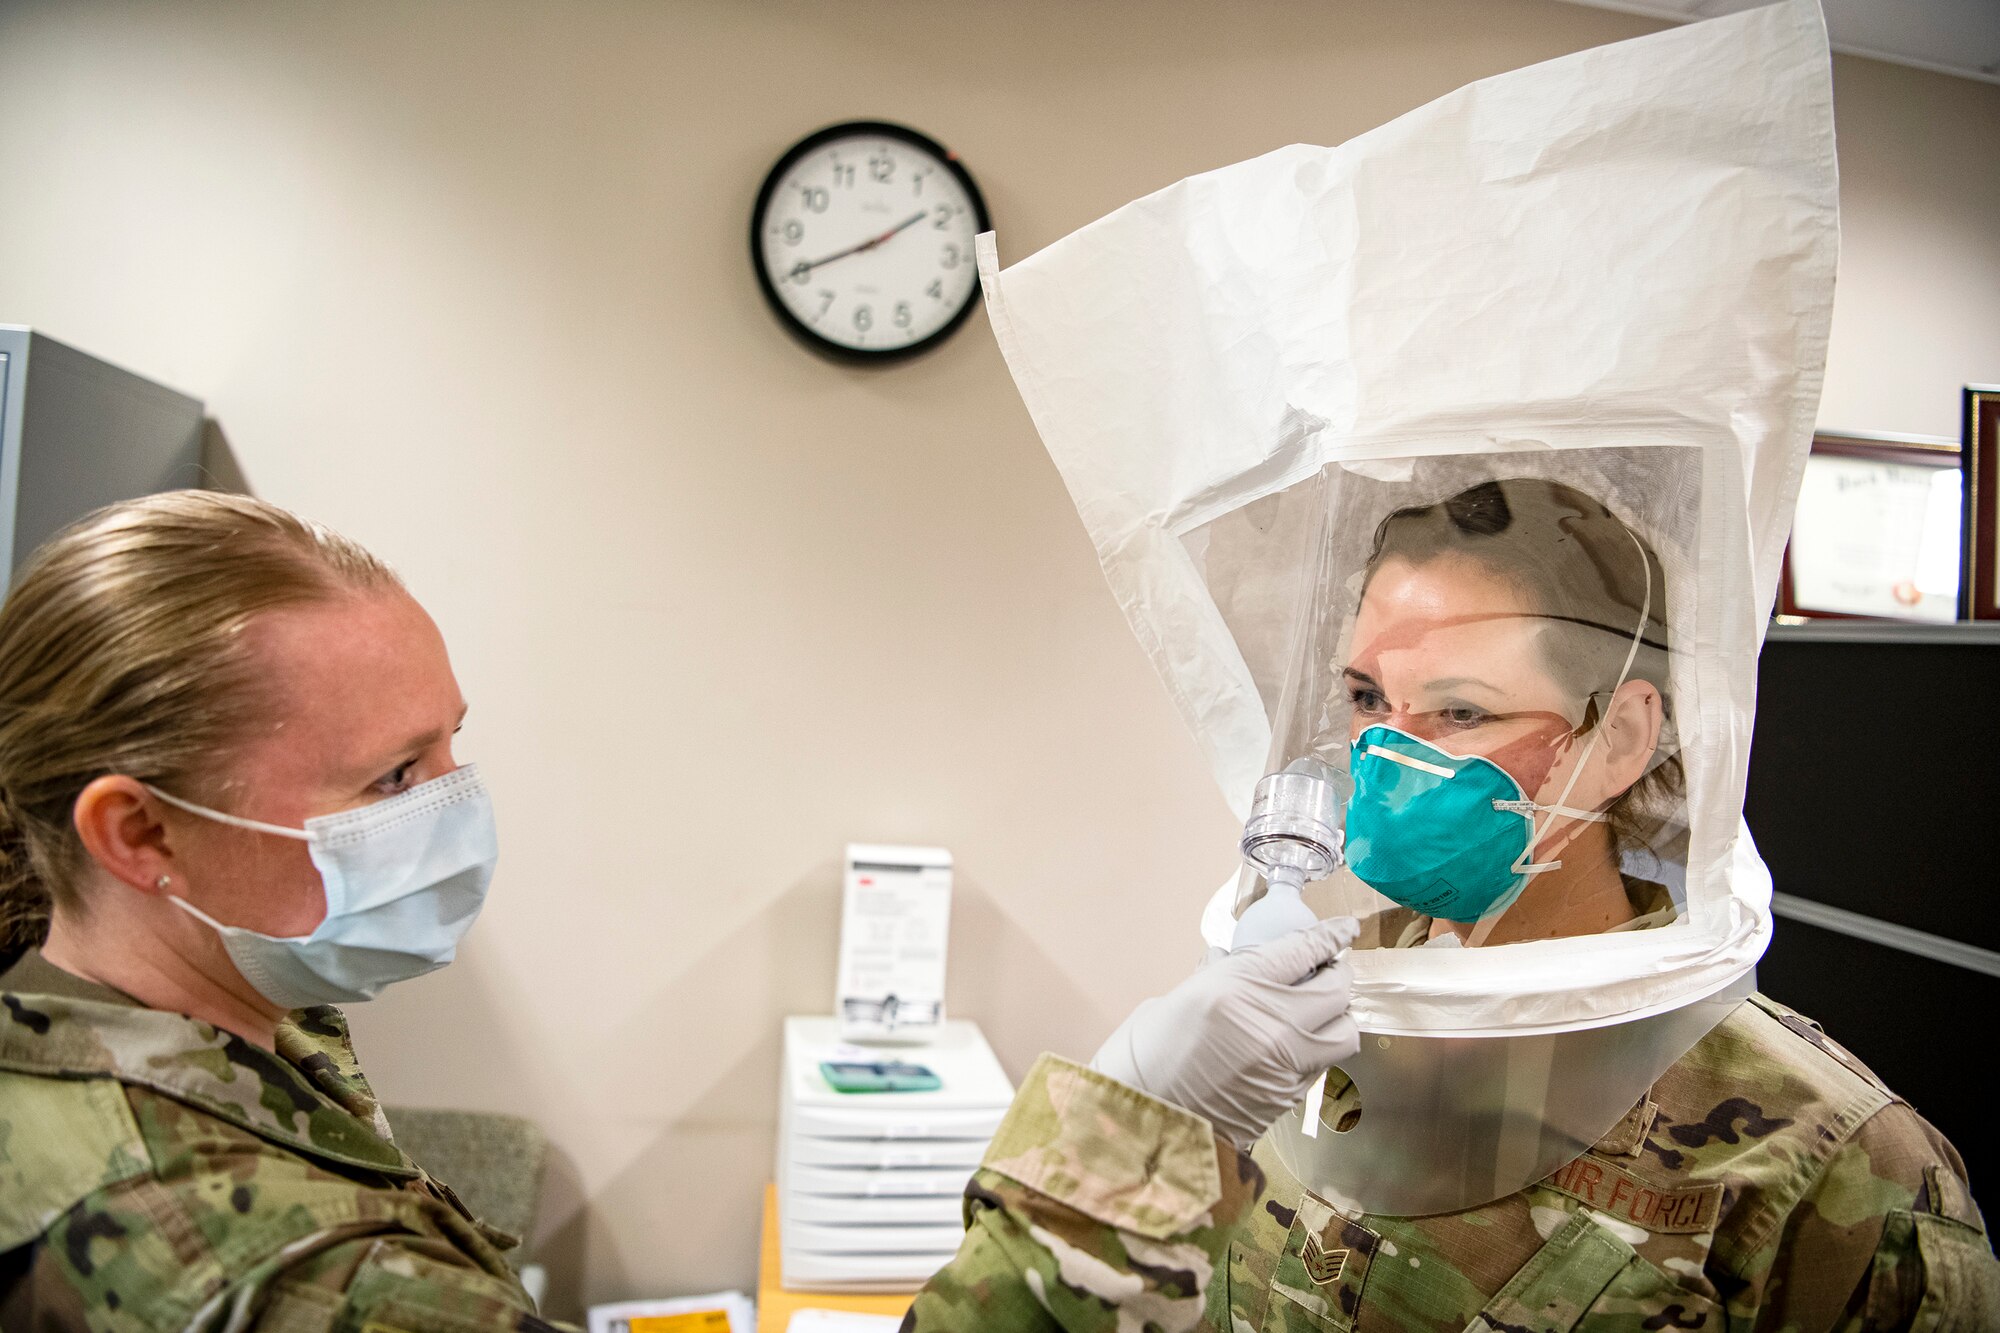 U.S. Air Force Tech Sgt. Kristen Nickerson, left, 423d Medical Squadron NCO in charge of bio-environmental engineering, conducts a qualitative fit test on a N95 mask for Staff Sgt. Jennalyse Adam, 423d MDS dental assistant, at RAF Alconbury, England April 14, 2020. The 423d MDS were conducting fit tests of the N95 mask to ensure personnel are safe to continue to treat patients who may have contracted the novel coronavirus. (U.S. Air Force photo by Senior Airman Eugene Oliver)